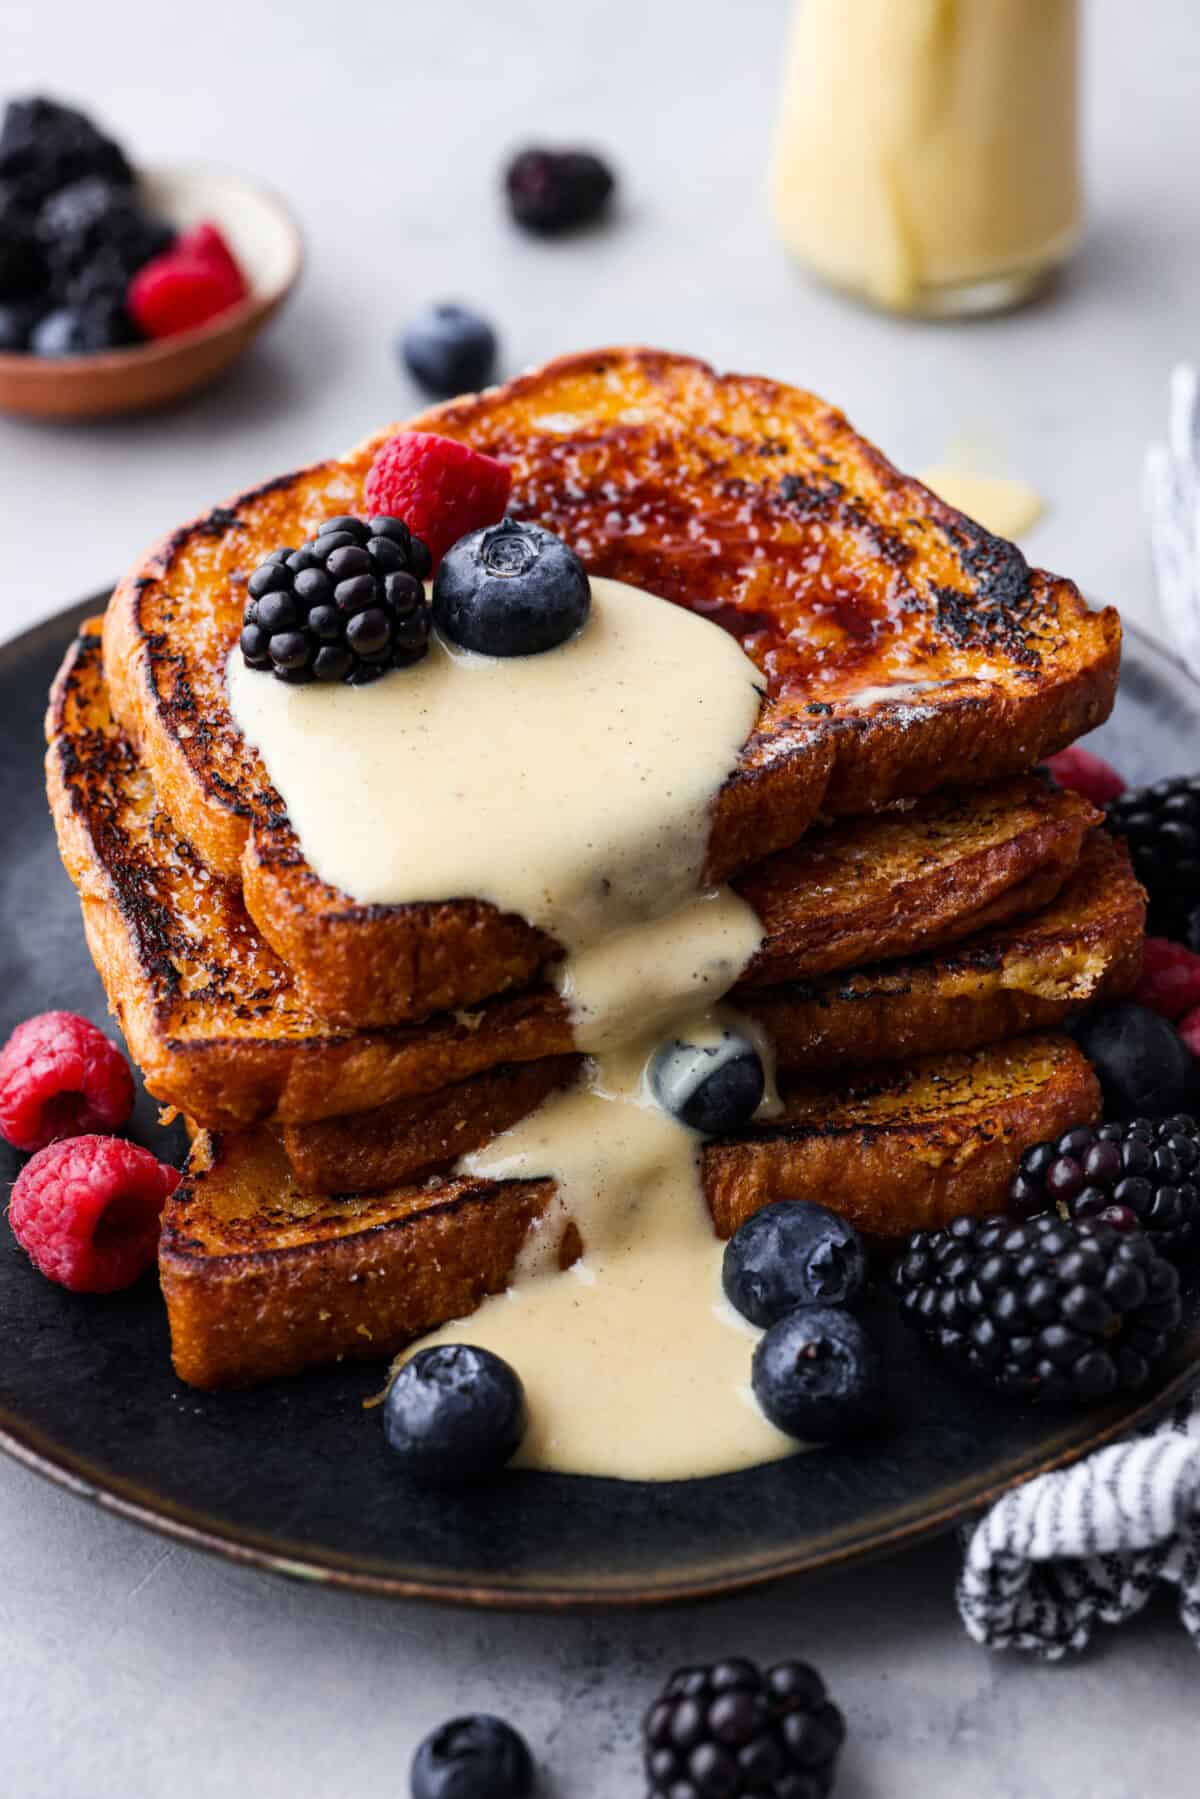 Close view of the stack French toast with creme anglaise sauce and berries on top.